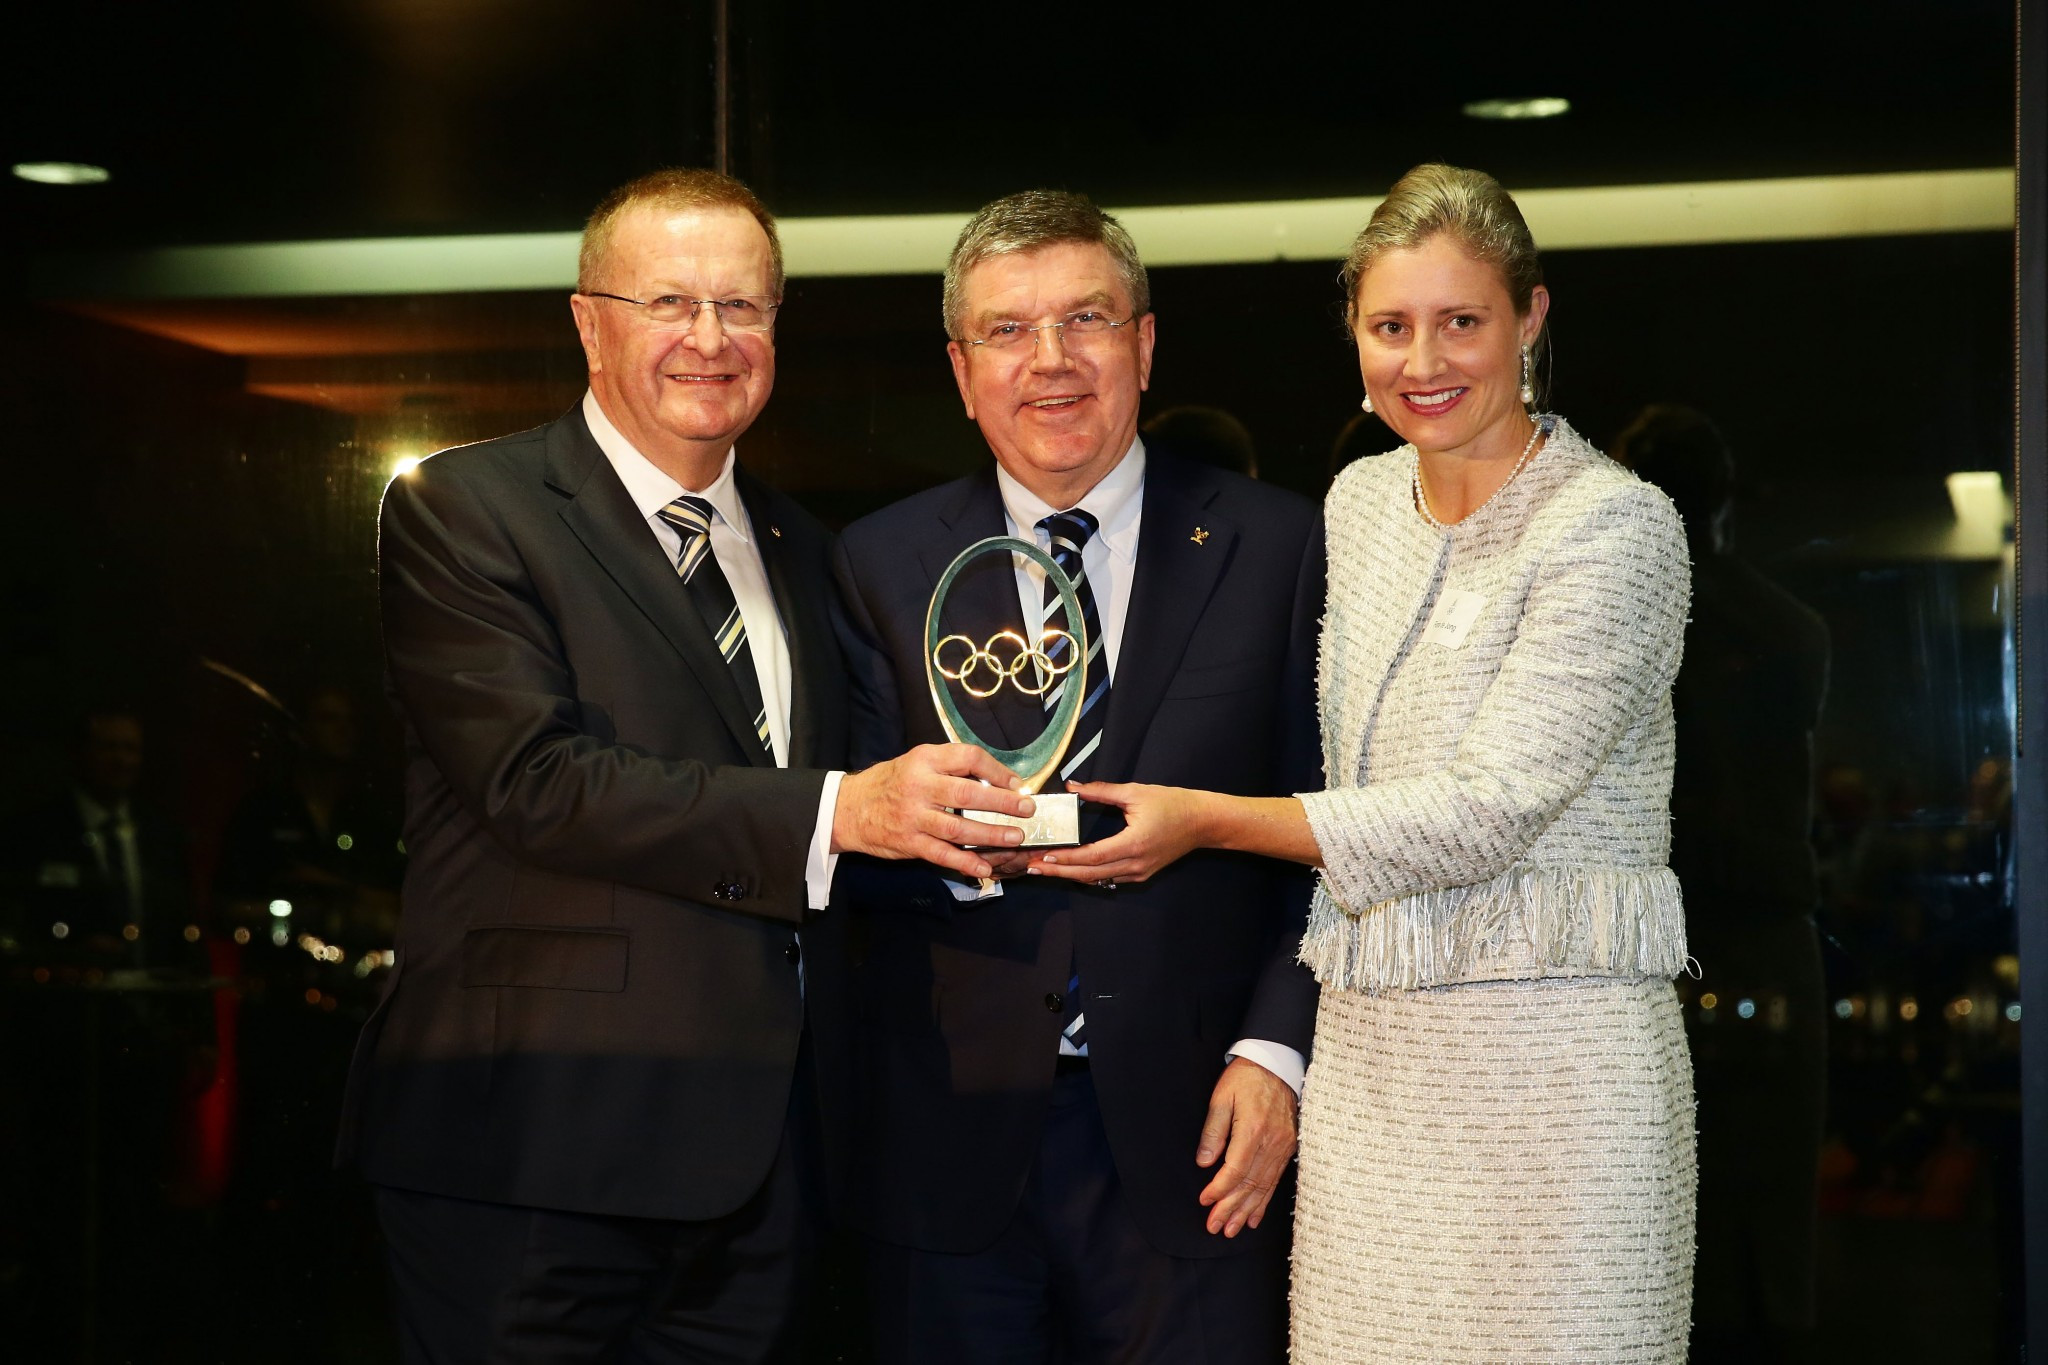 Fiona de Jong, right, pictured alongside John Coates, left, and IOC President Thomas Bach in April 2015 ©Getty Images